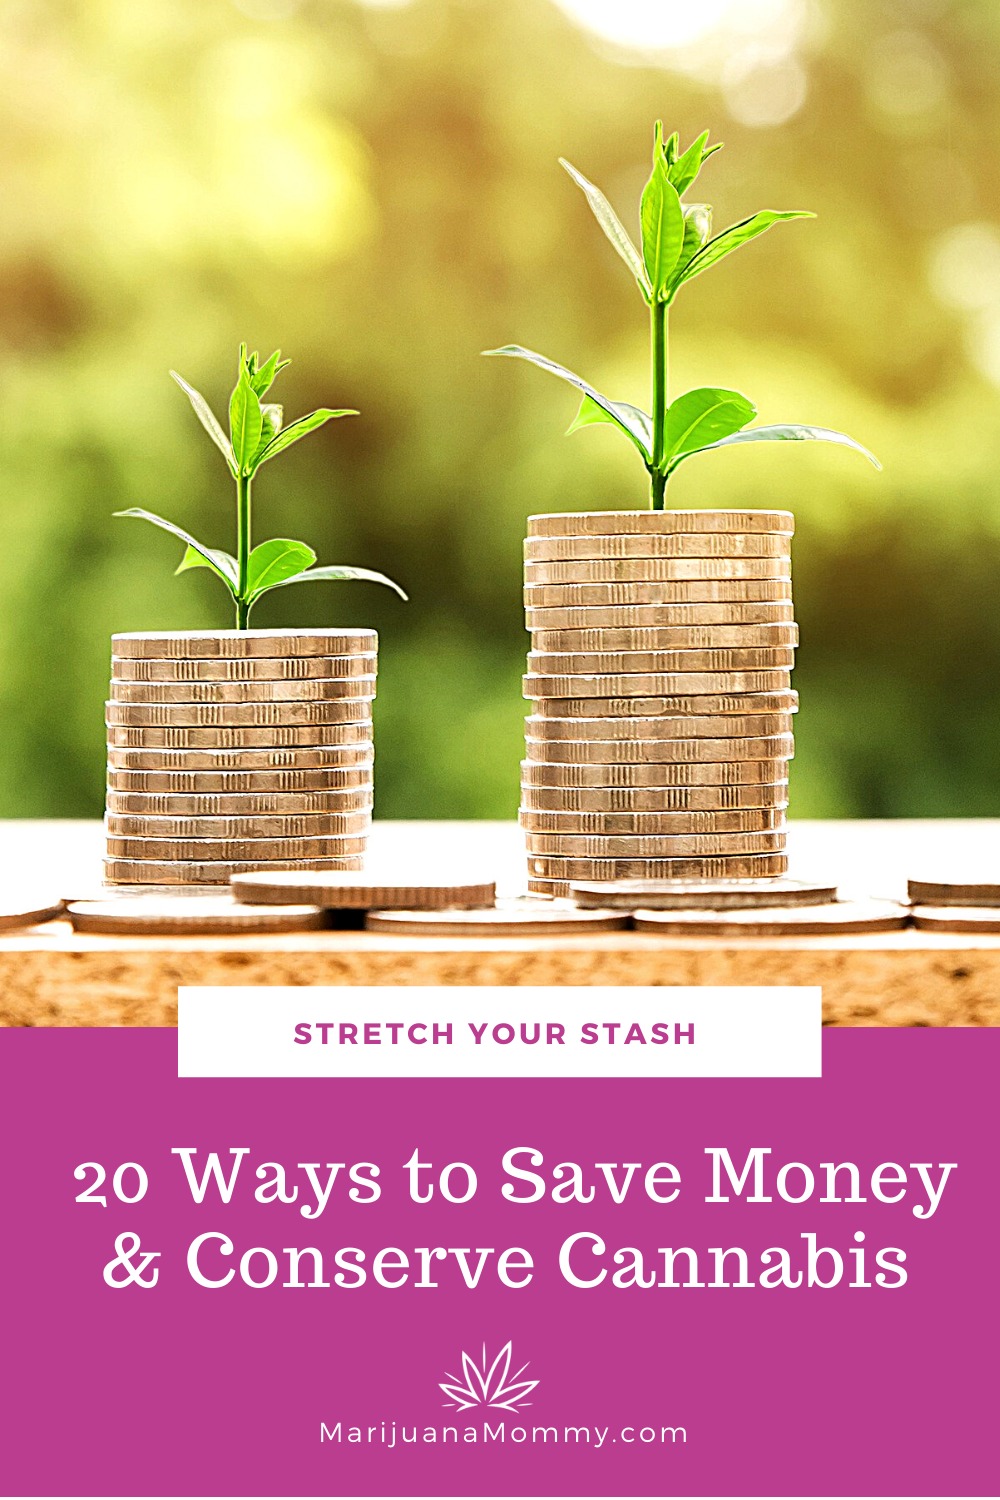 Stretch Your Stash - 20 Ways to Save Money and Conserve Cannabis